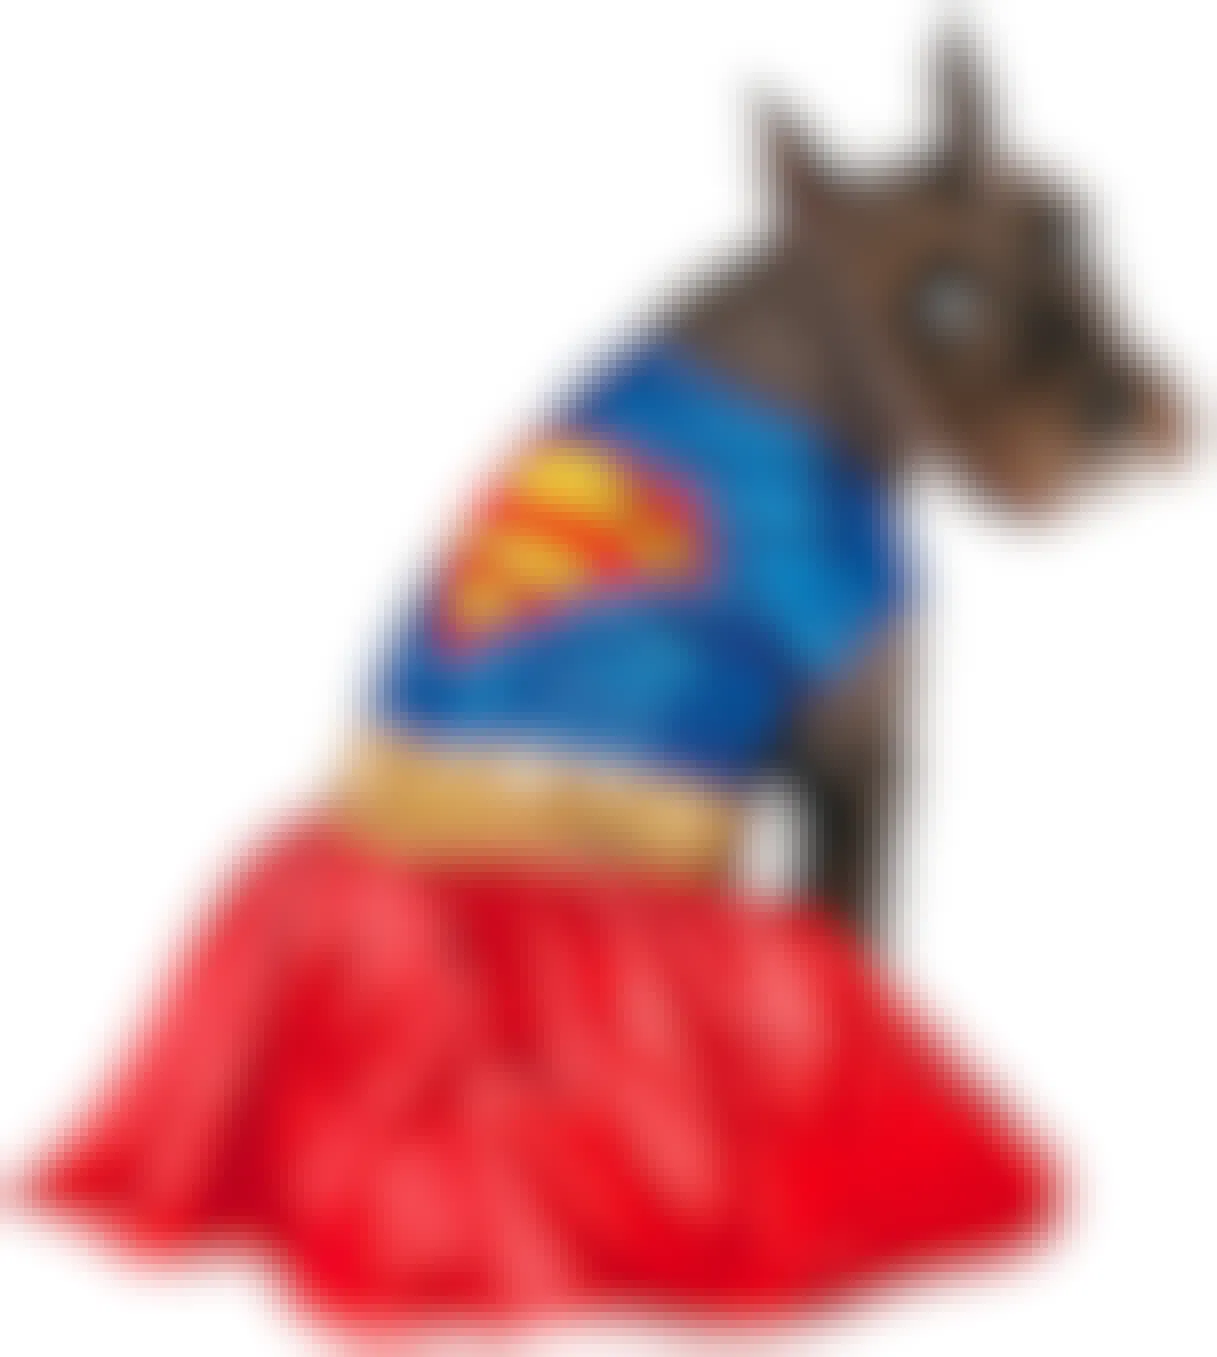 A dog wearing a Supergirl costume on a white background